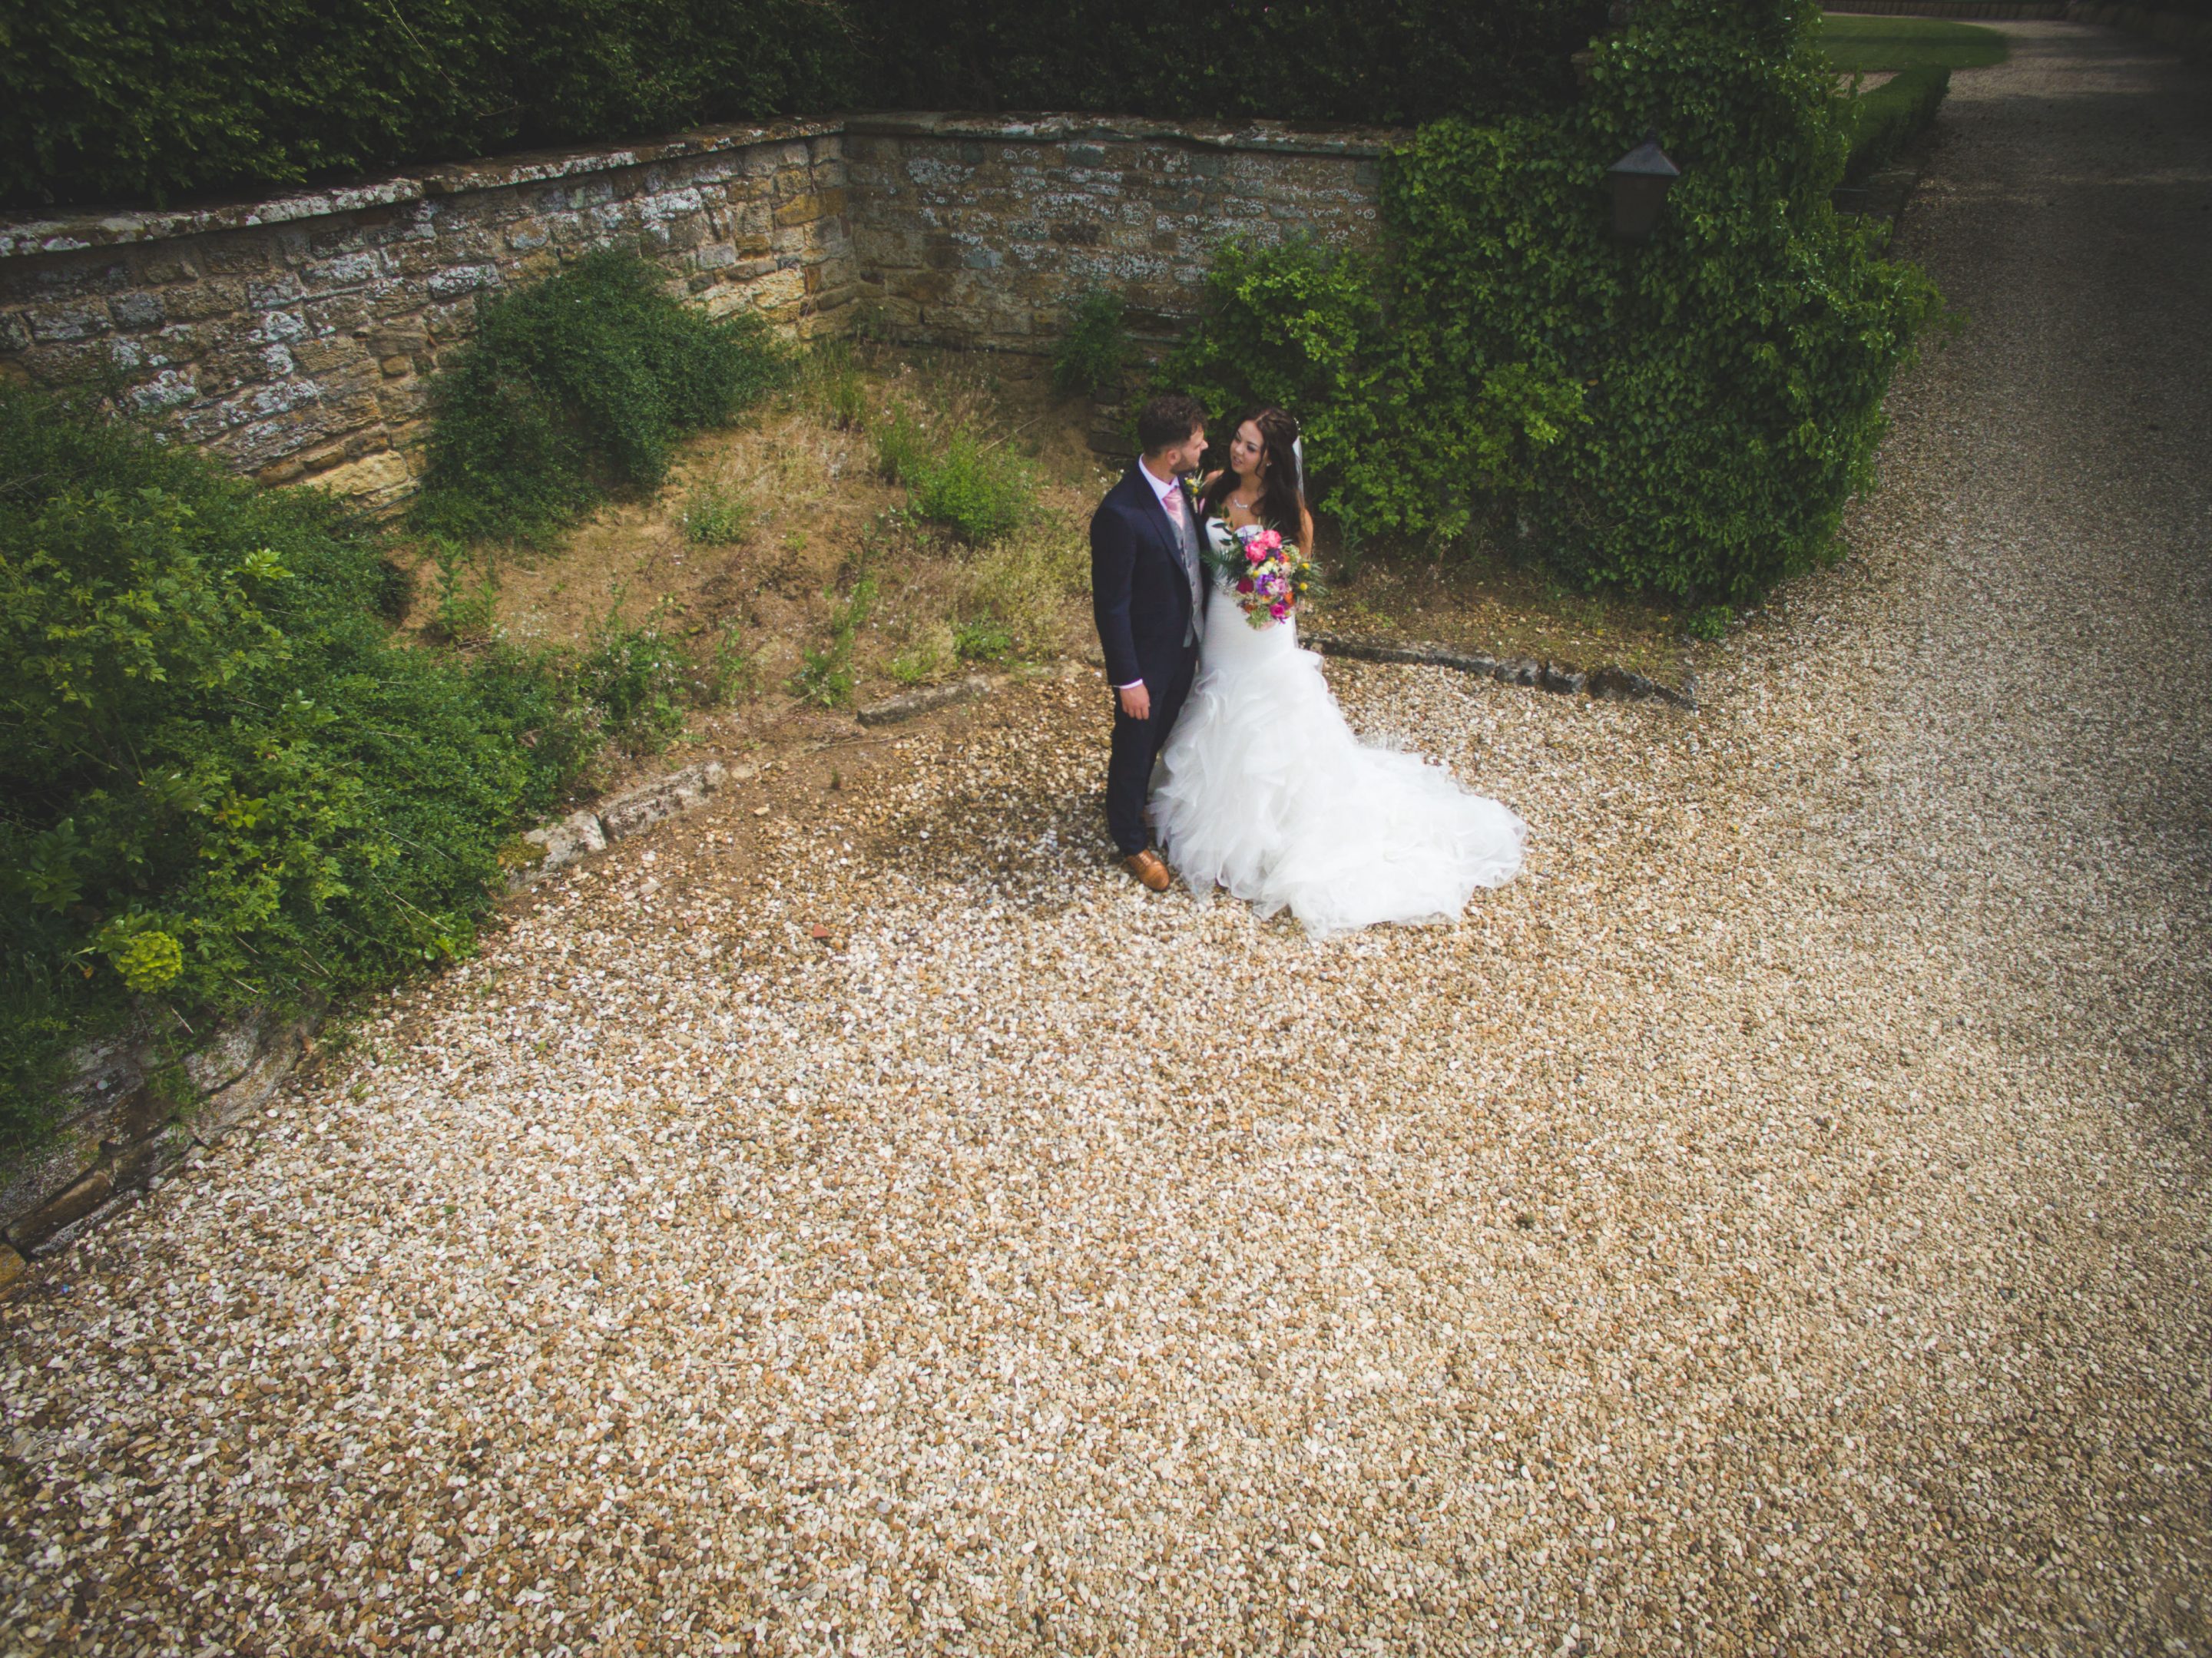 From above with the drone, the bride and groom at the side of Highgate House